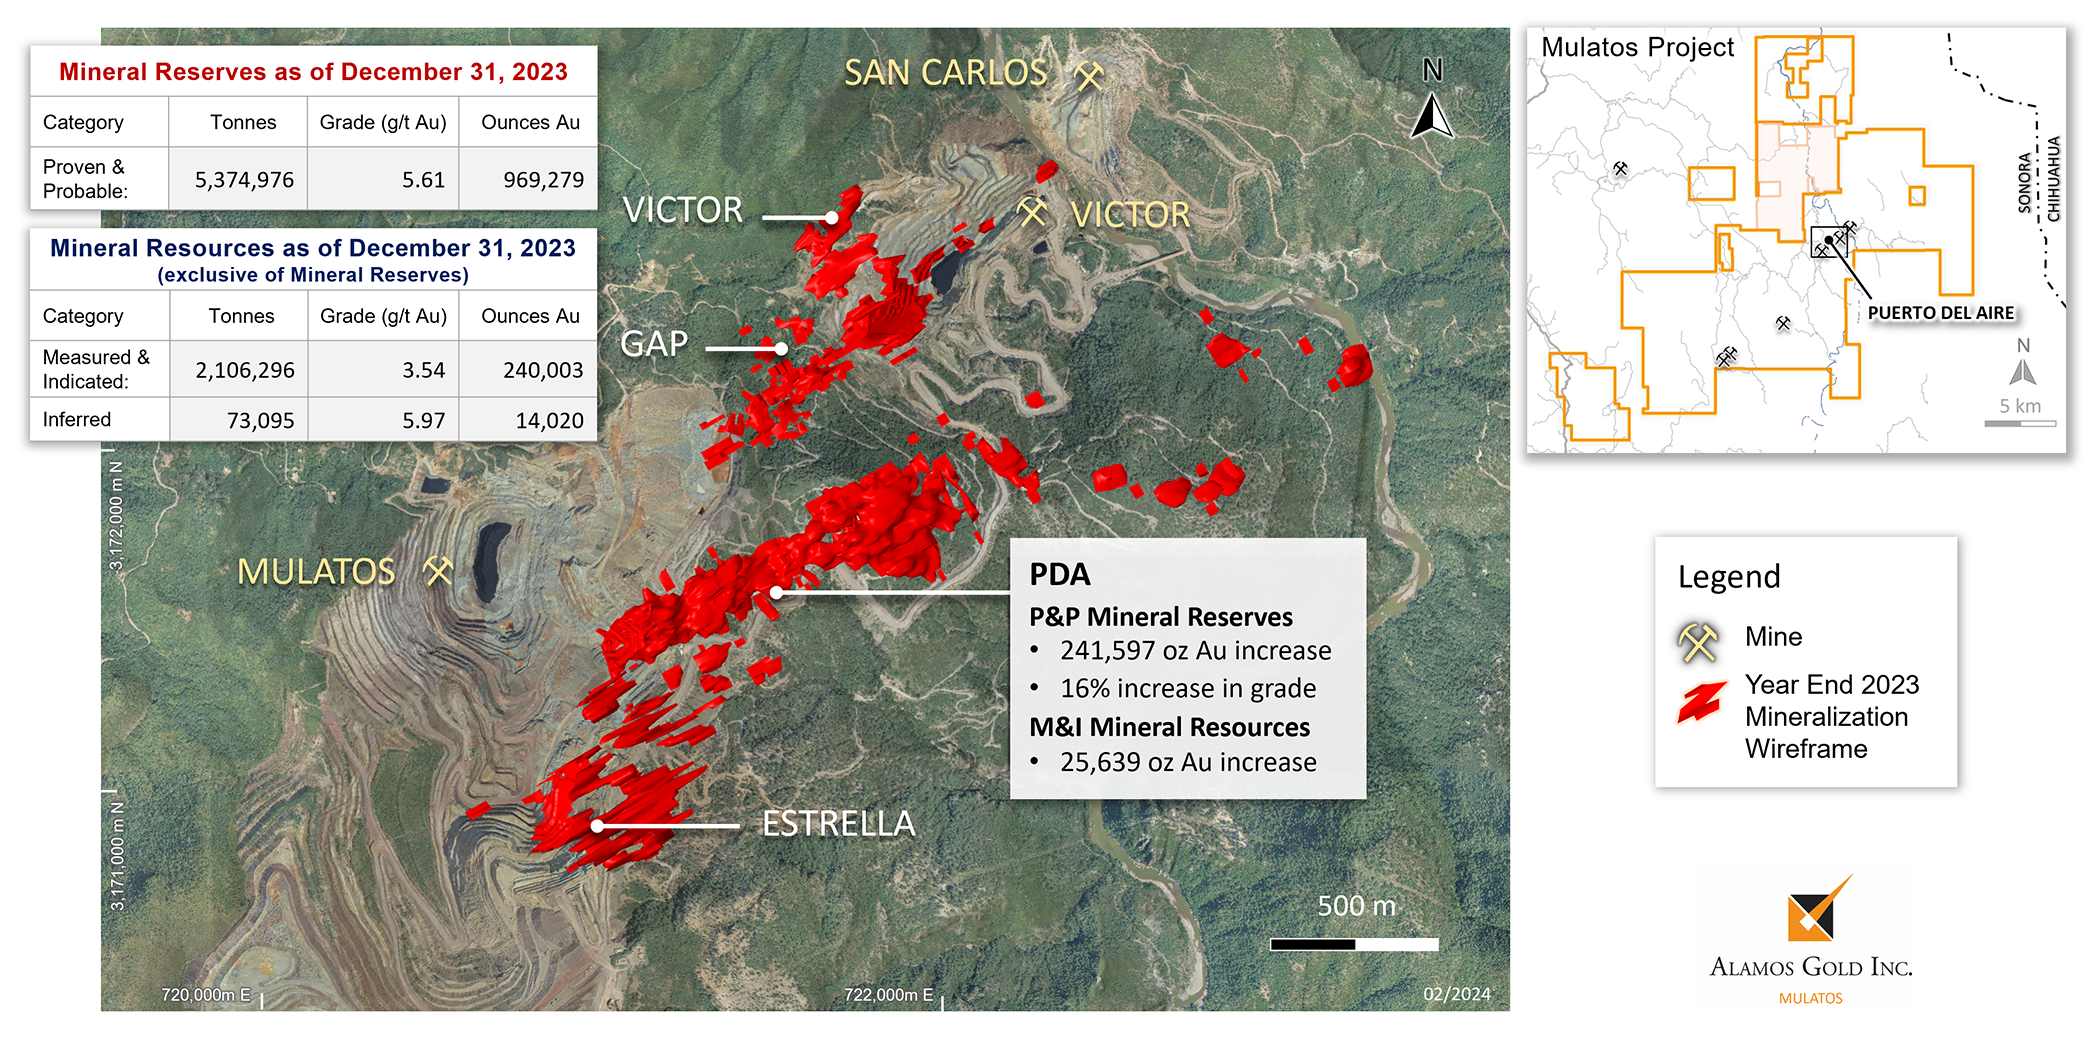 Figure 3 Puerto Del Aire Sulphide Gold Mineralization Wireframes - 2023 Mineral Reserves and Resources